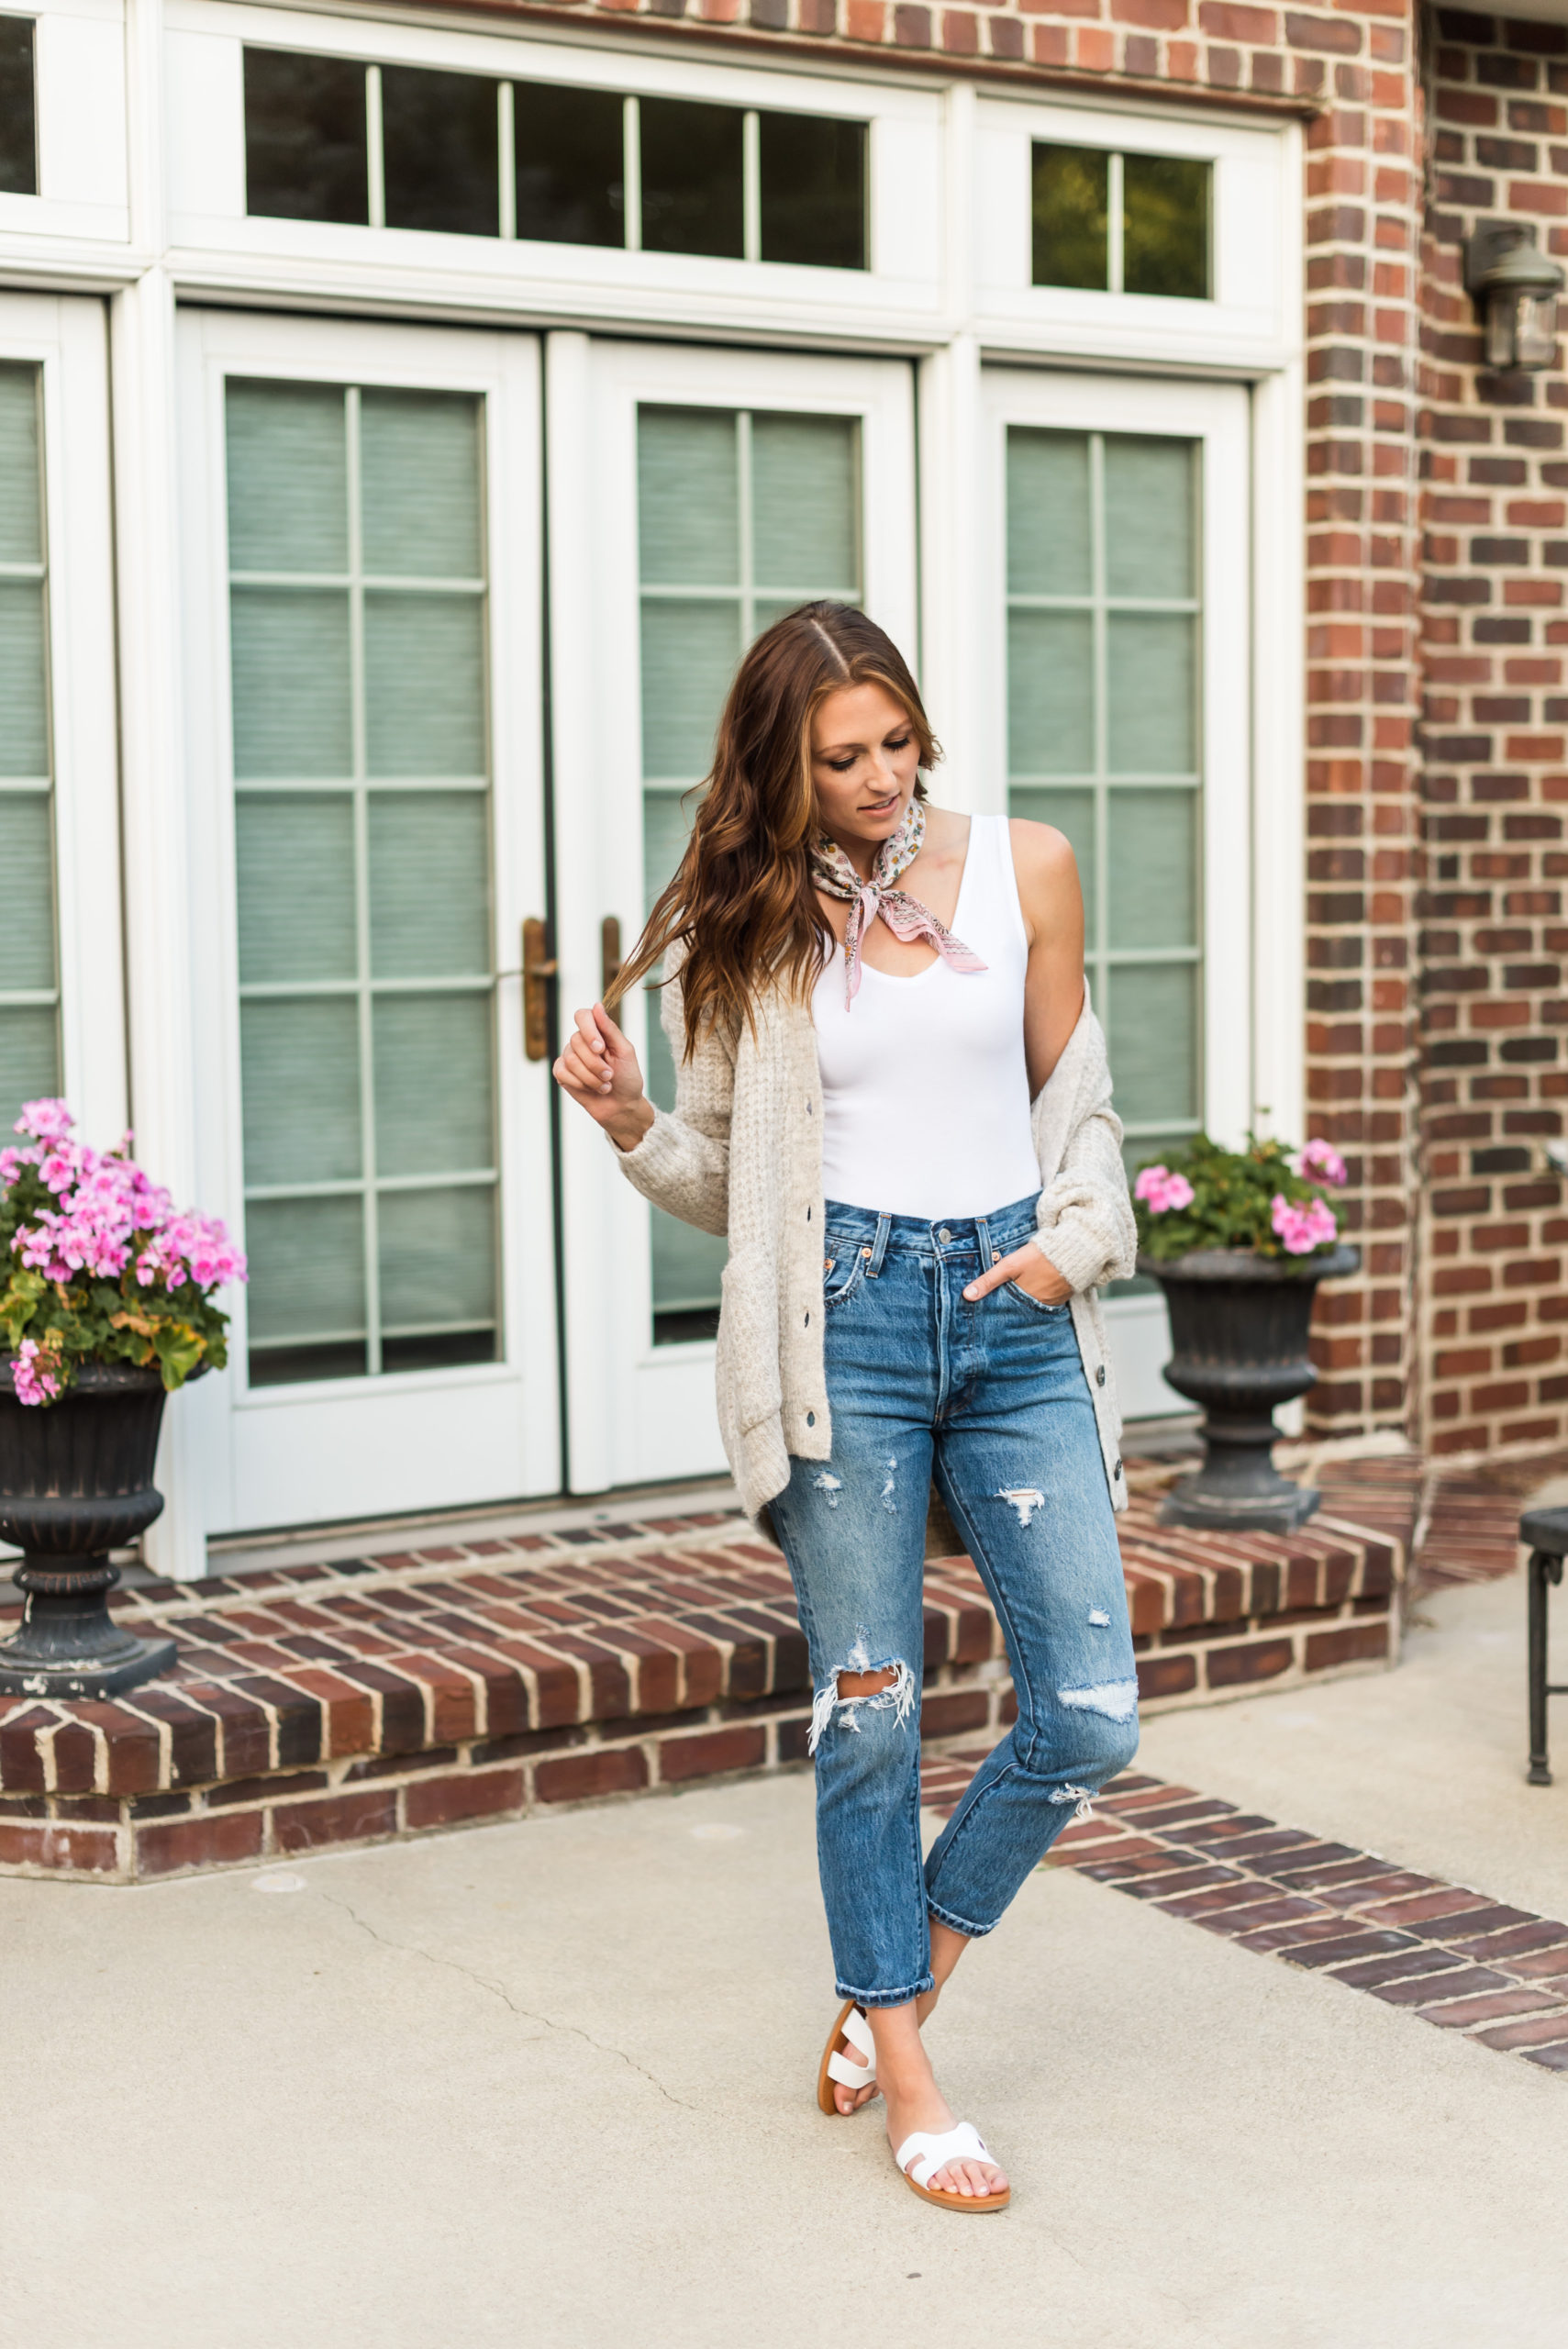 A Cardigan and High-Waisted Denim | Midwest In Style